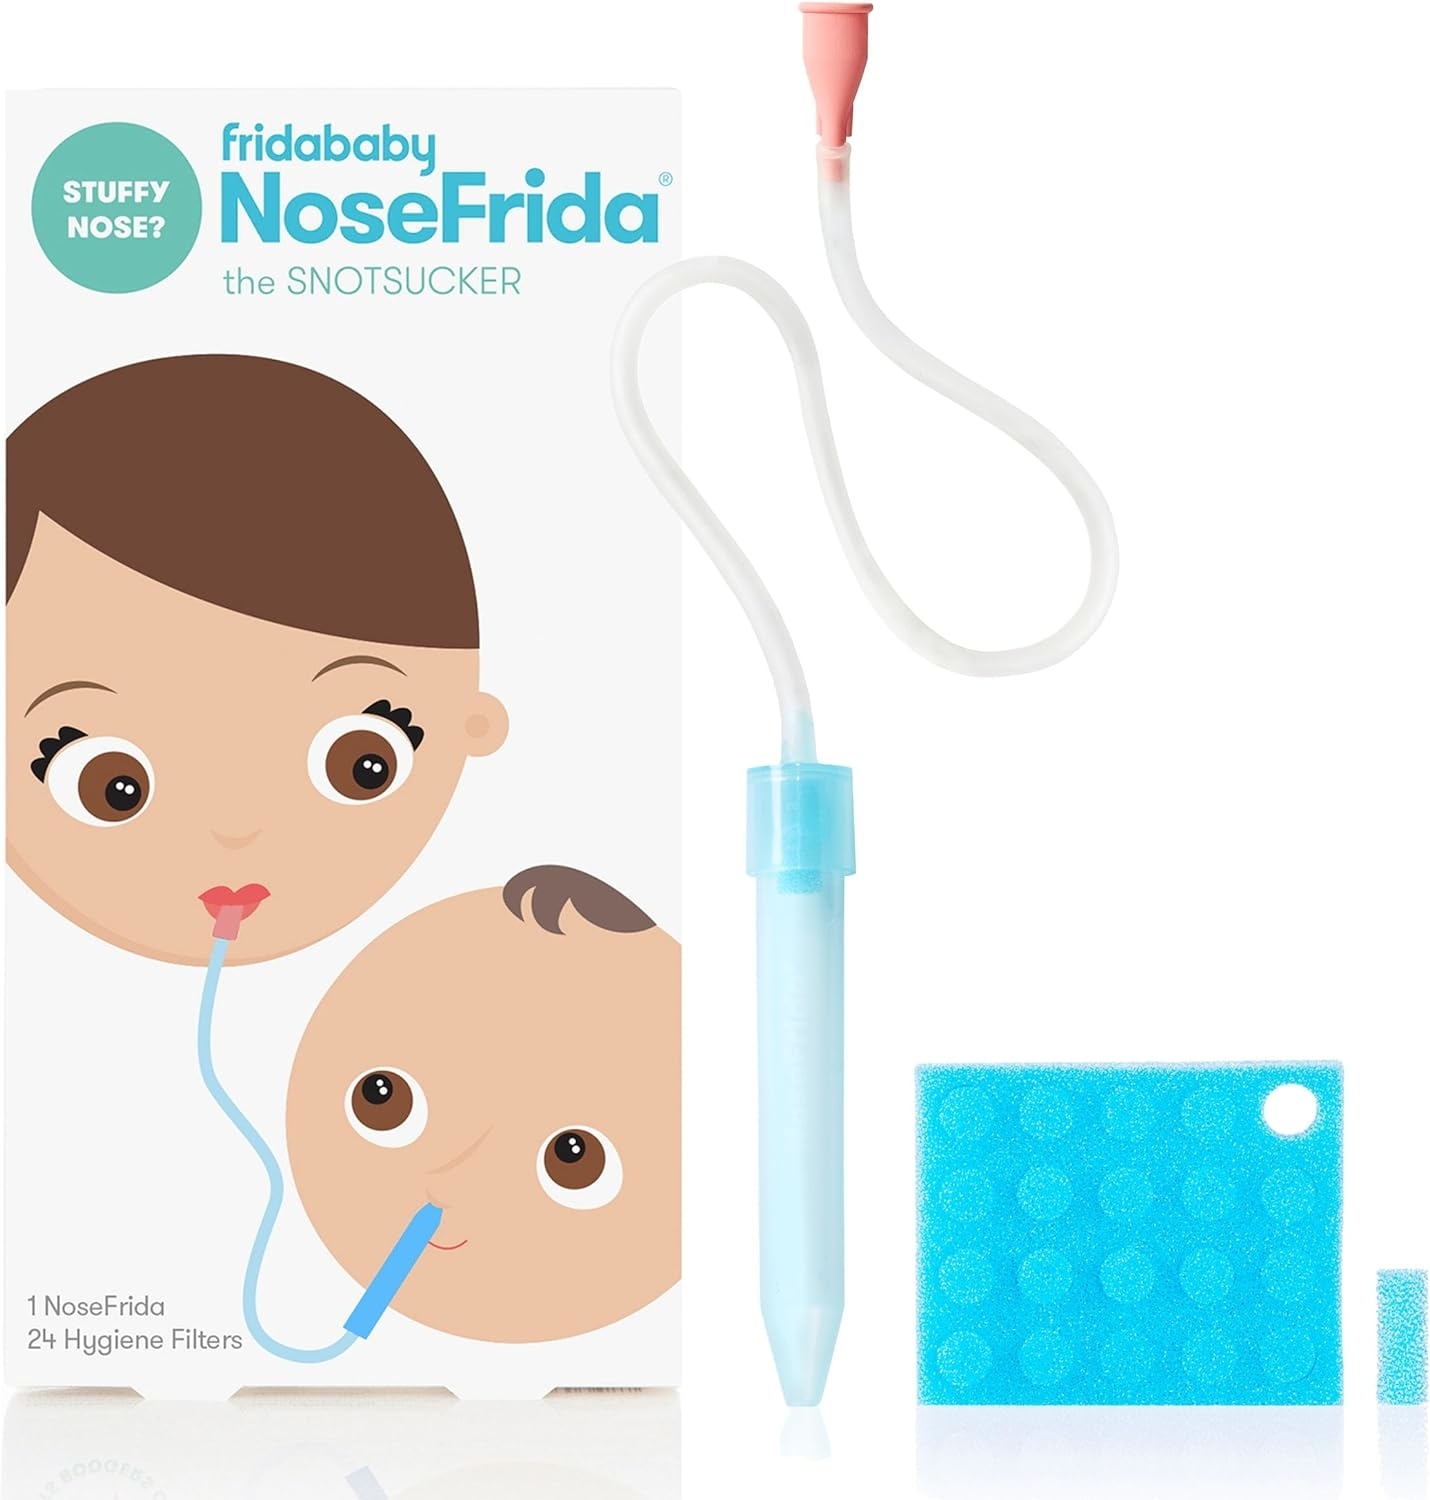 The nose frieda device with hygiene filters